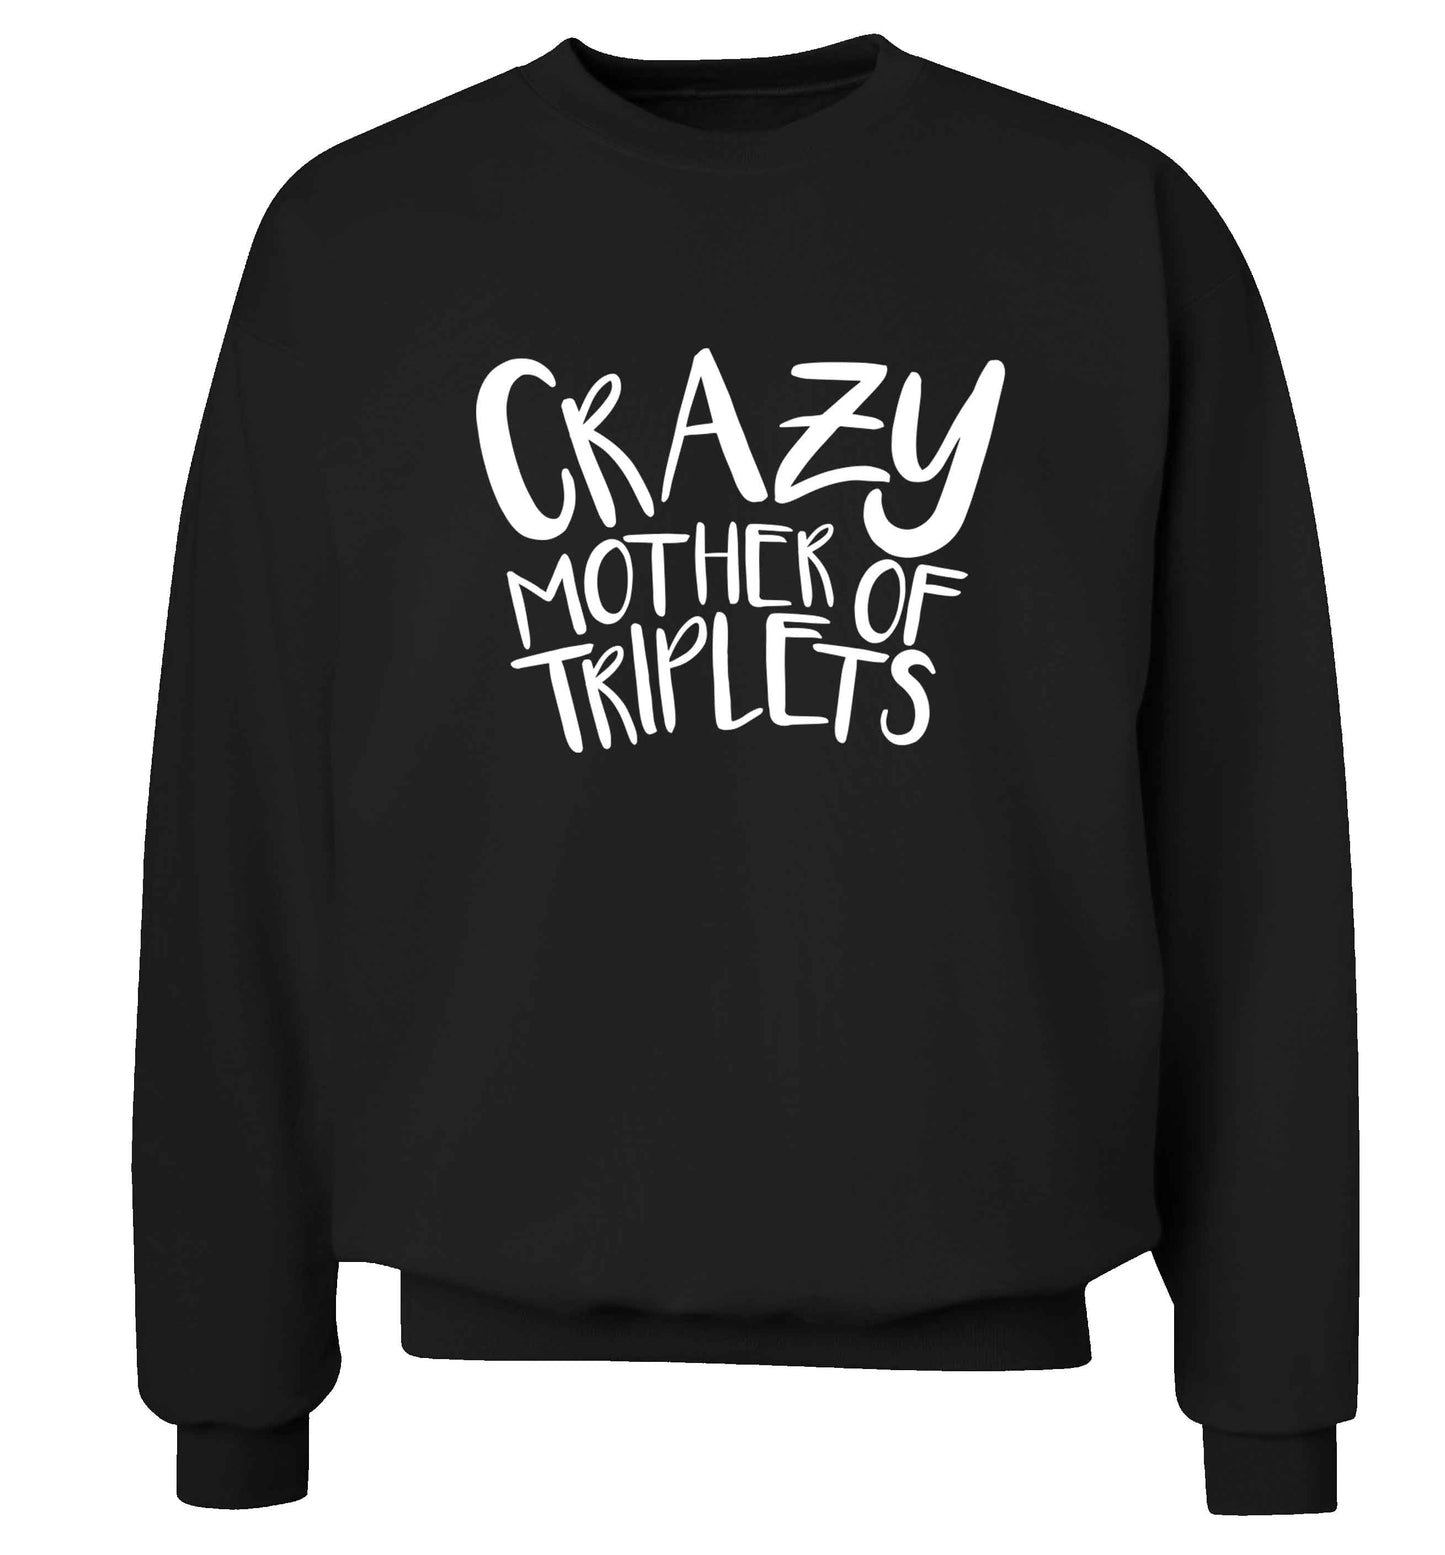 Crazy mother of triplets adult's unisex black sweater 2XL